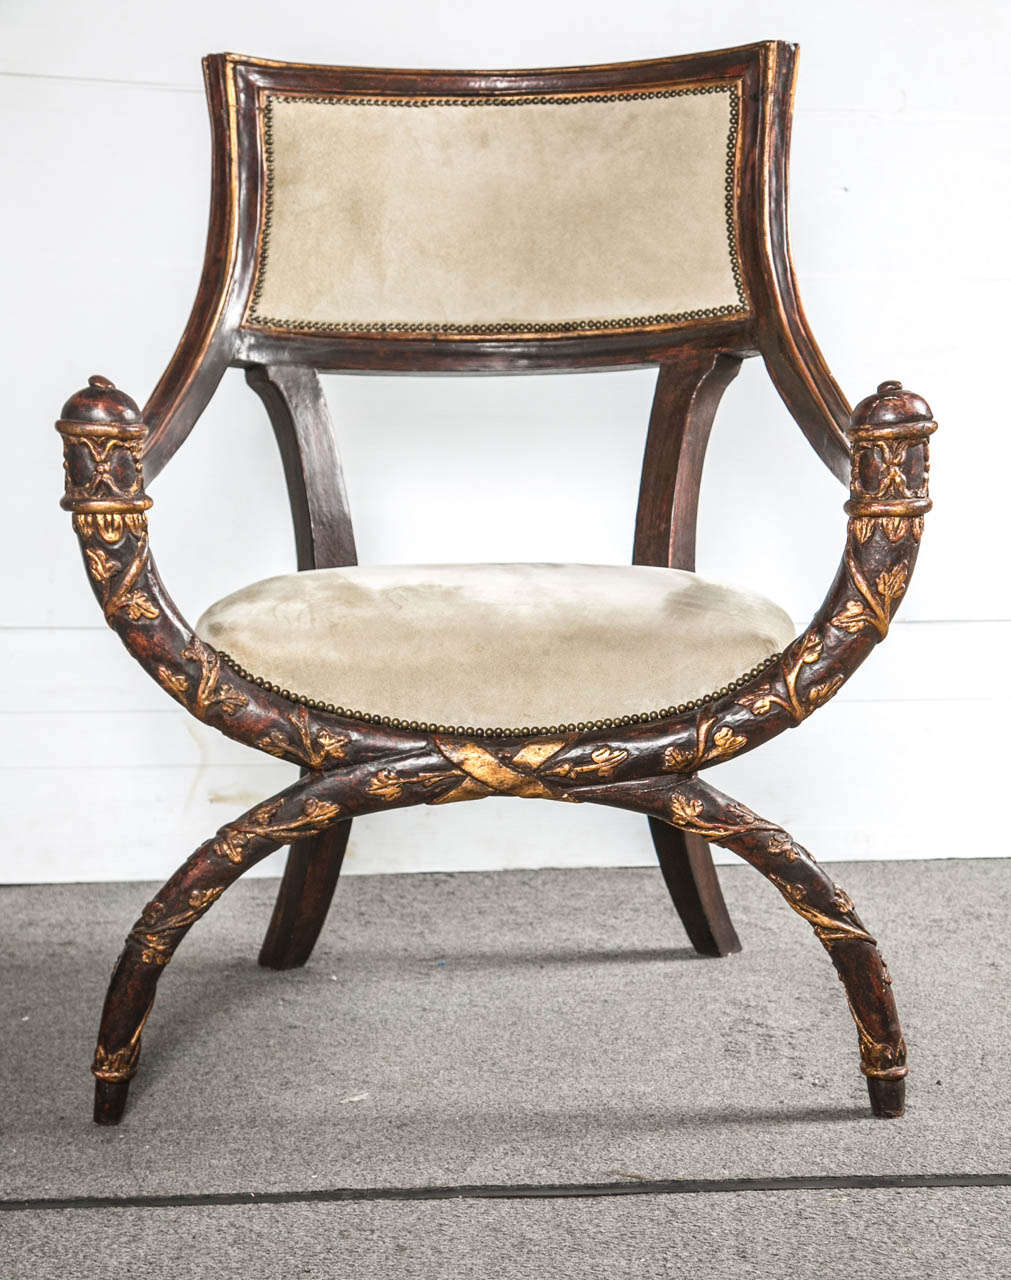 A pair of finely carved Cerule open armchairs. C shaped upper and lower fronts with curved arms and framed backs.